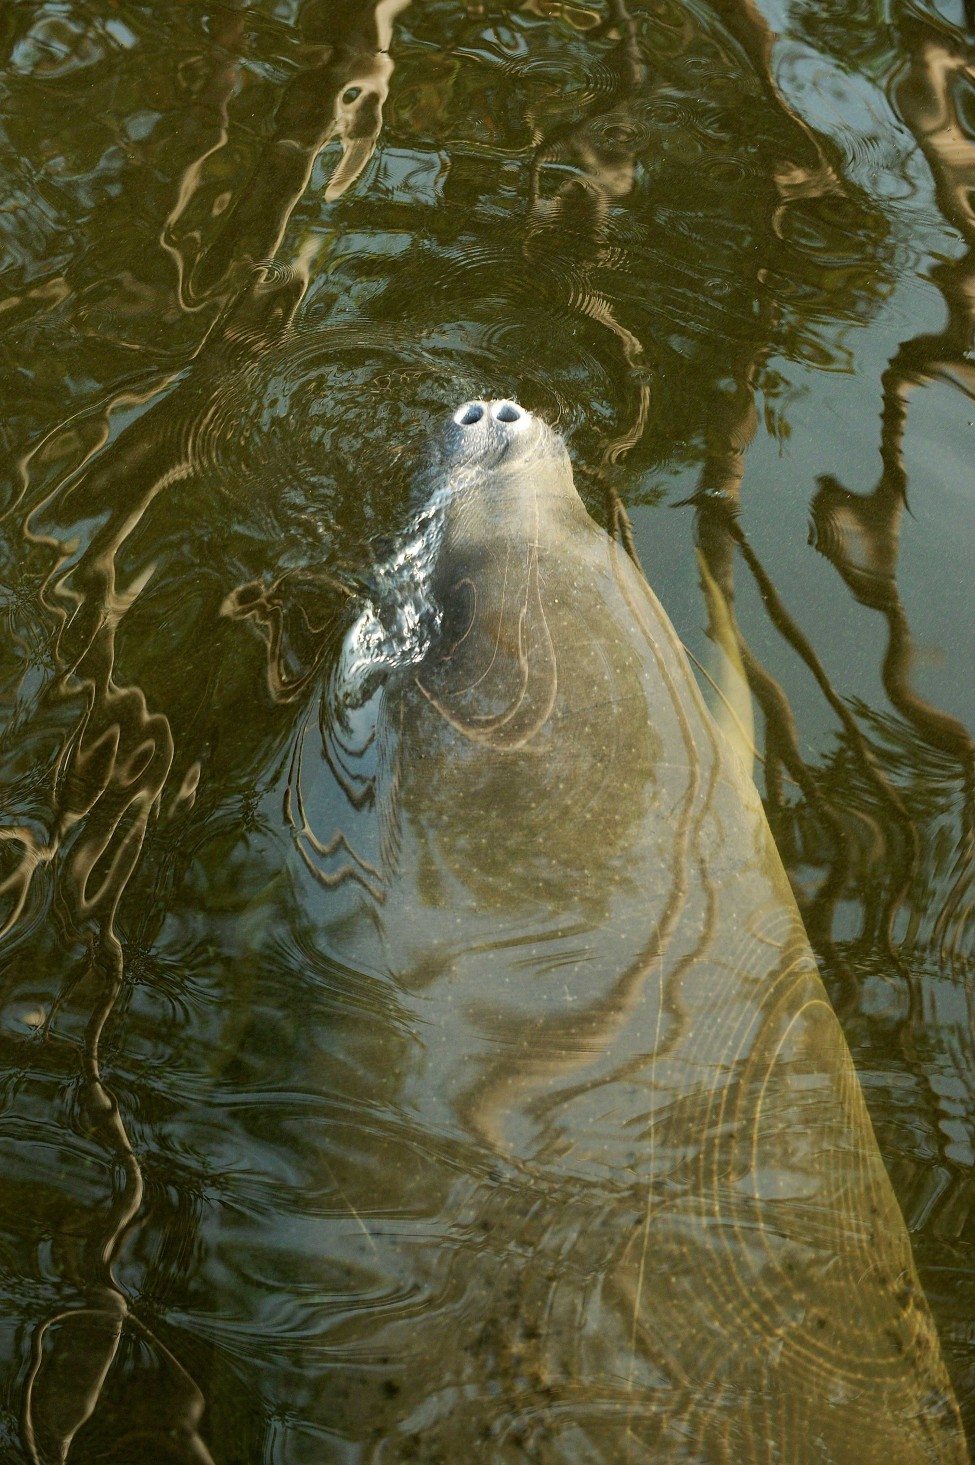 A manatee rises to take a breath in N'dogo Lagoon. Although there is a lot of legislation to protect the African manatee, including its listing in CITES Appendix 1, there is little enforcement to deter poachers.<br />
Photo by Thomas Peschak